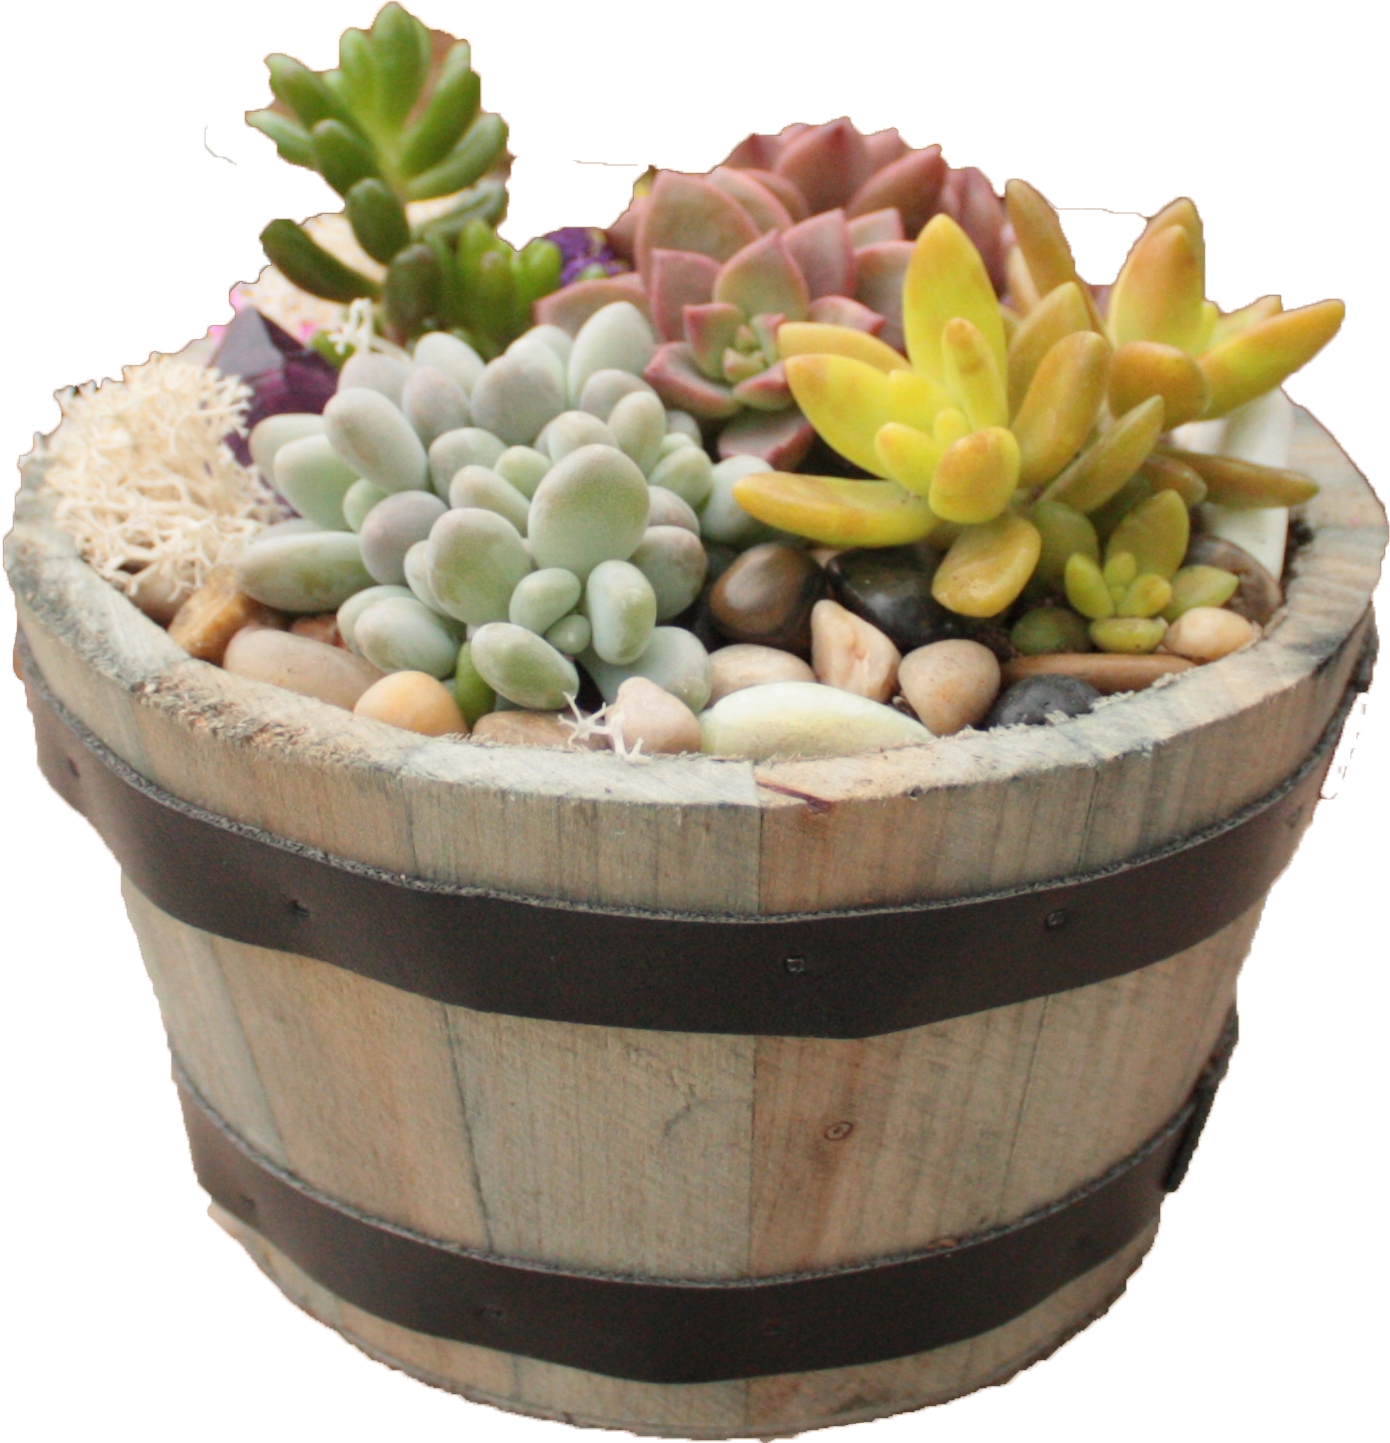 A Succulents in Whiskey Barrel plant nite project by Yaymaker